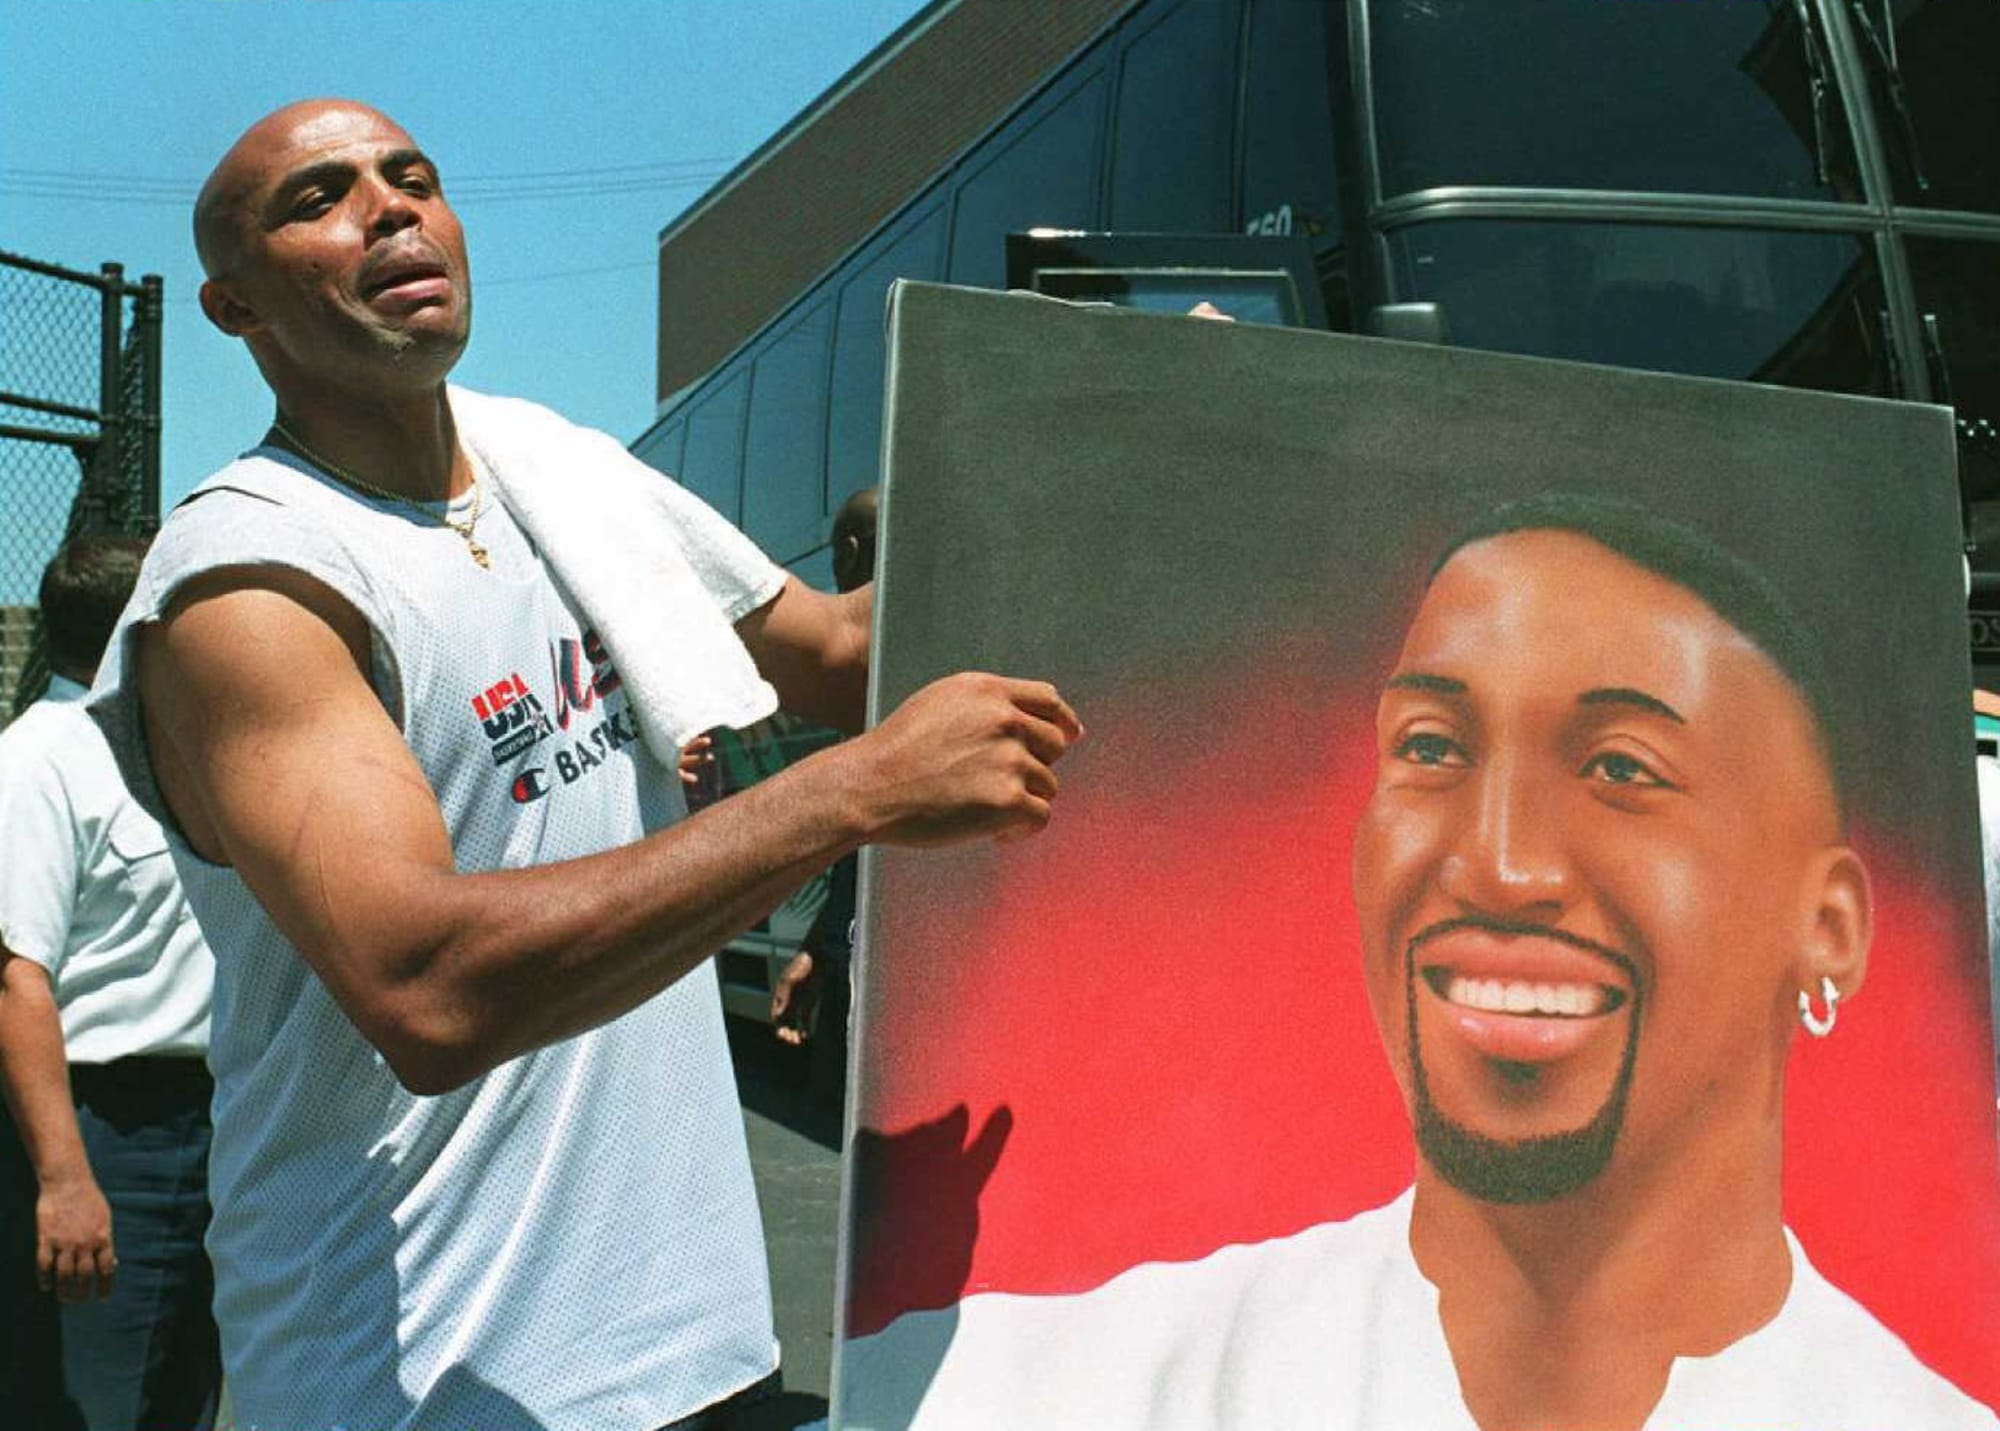 Teammates to frenemies - The fractured friendship of Pippen and